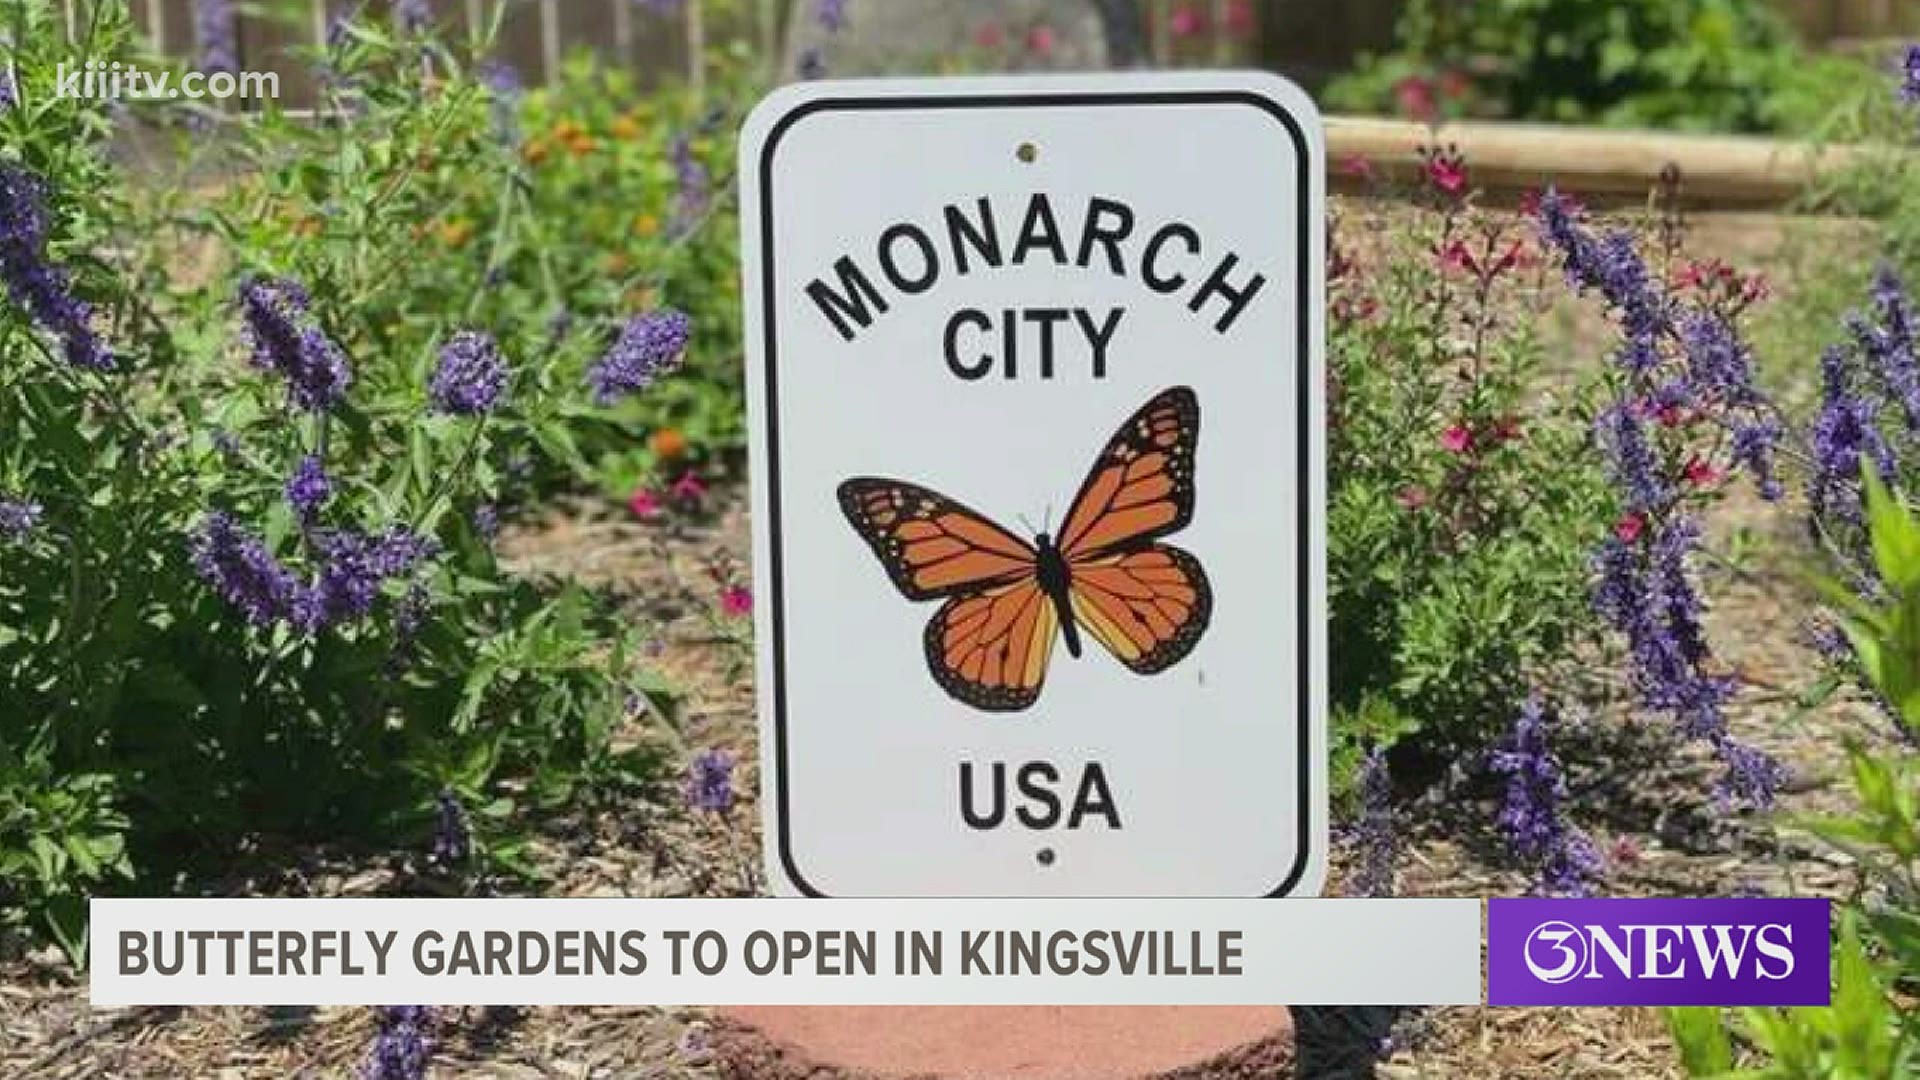 Kingsville is celebrating Earth Day with the installation of two new butterfly gardens.